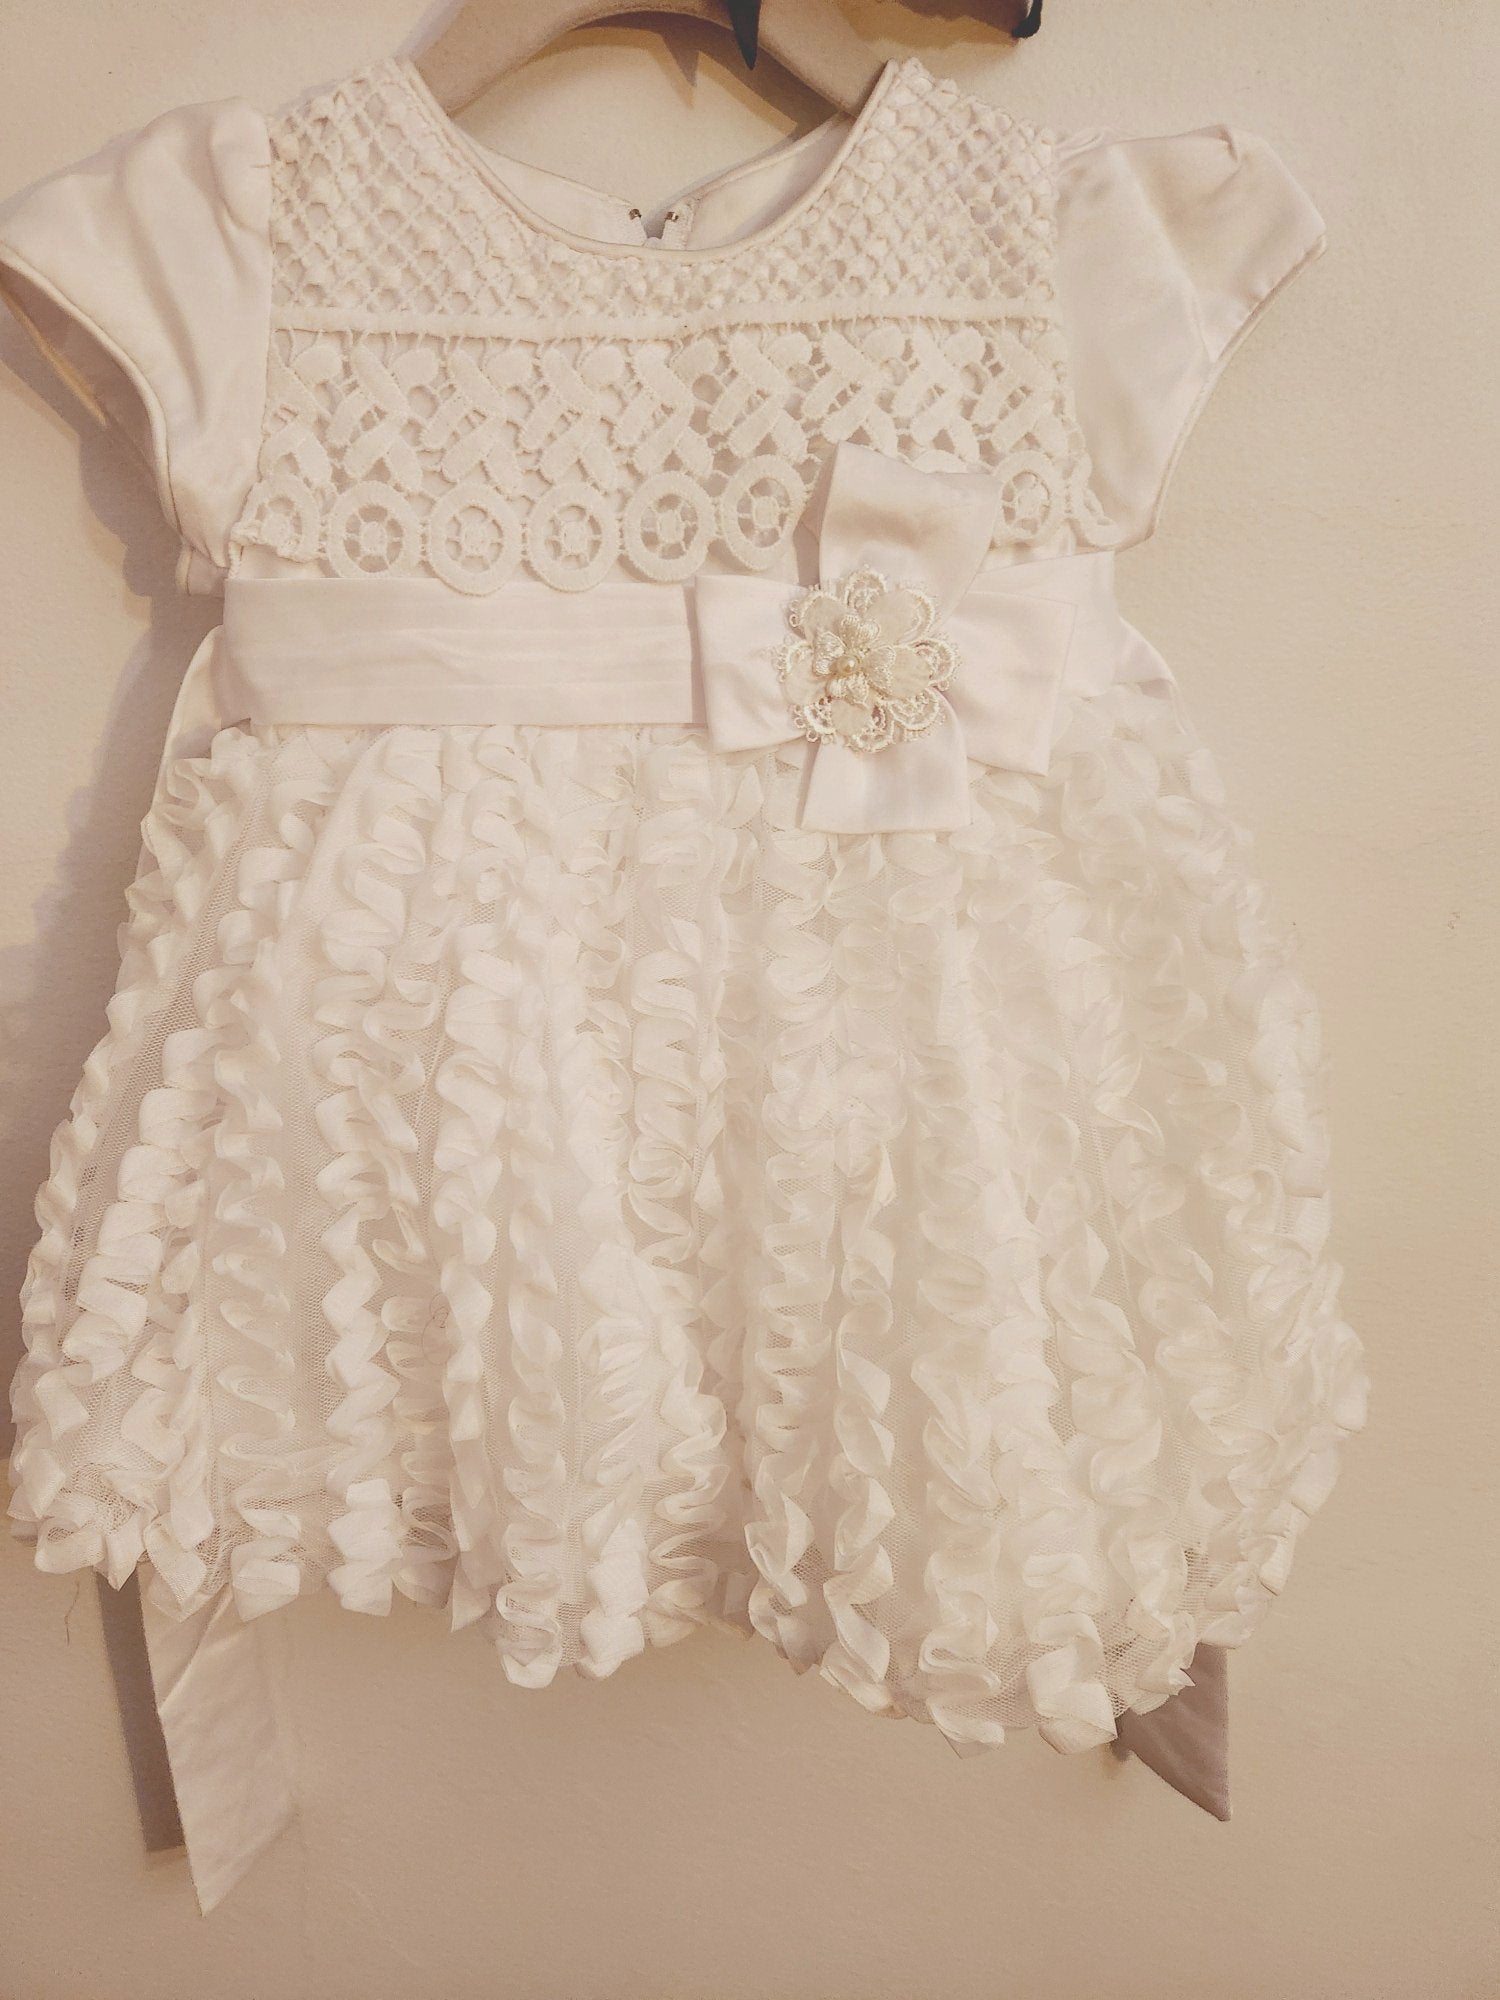 Baby Snowflake (12 months) Girl's Dress